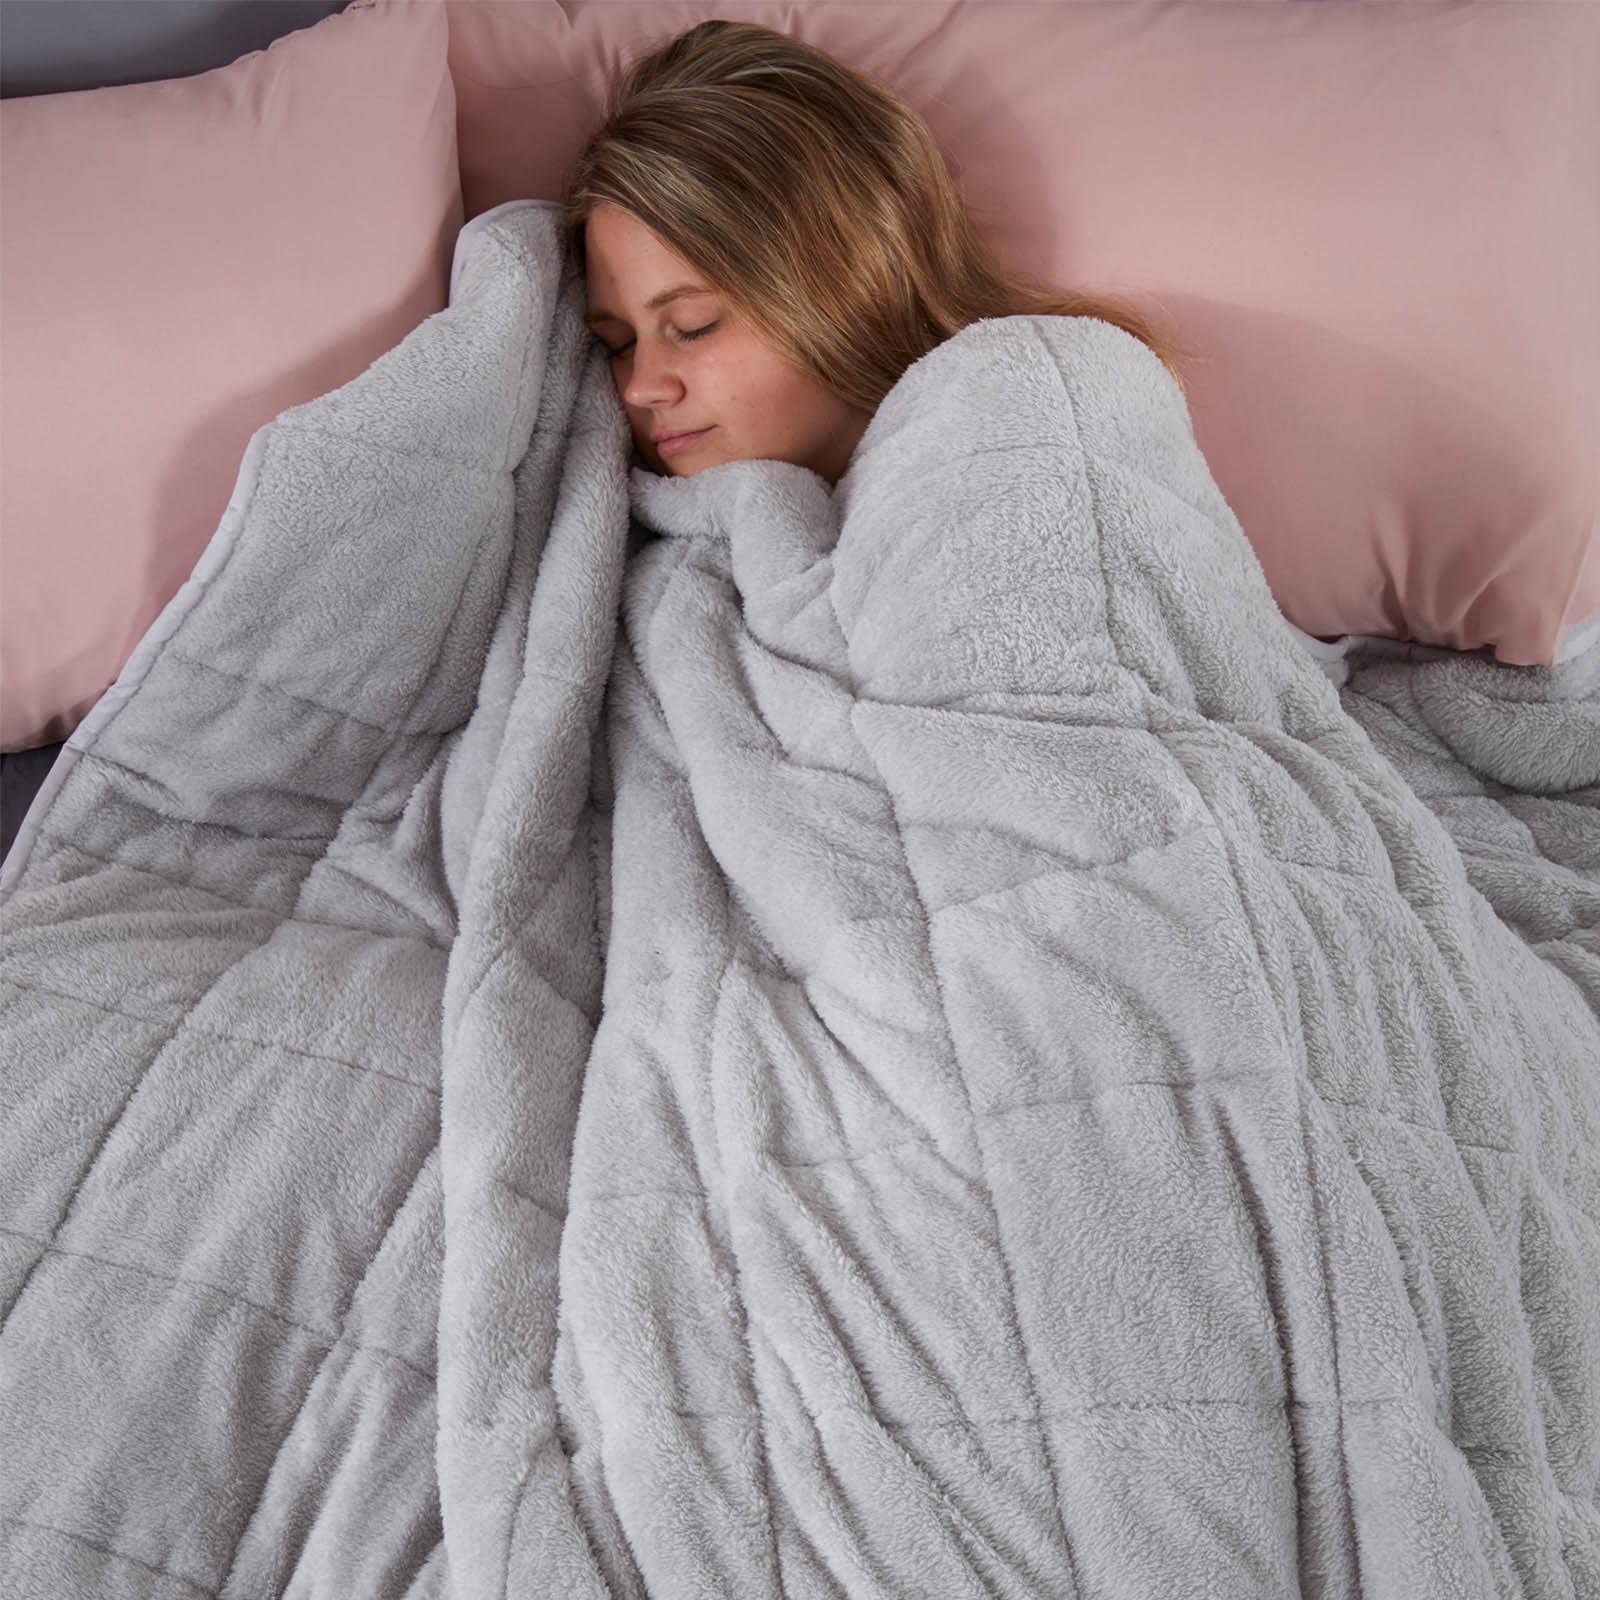 Brentfords Super Soft Teddy Fleece Weighted Blanket for Adults with Micro Glass Beads Adults Insomnia Anxiety Stress Relief, Silver Grey, 150 x 200cm - 8kg